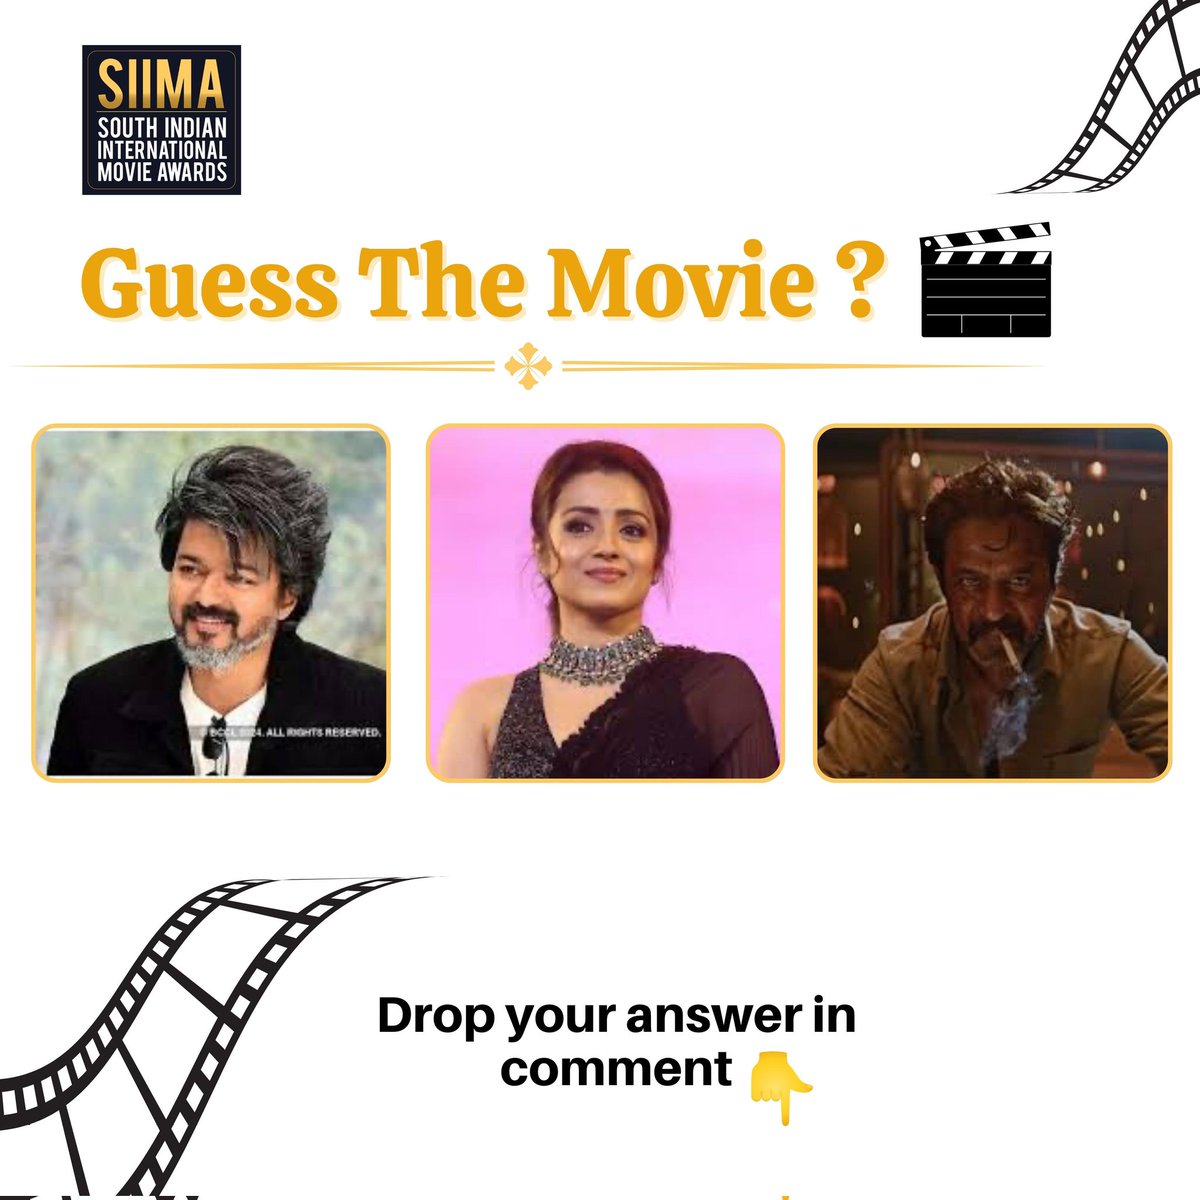 Guess the movie name?🎬🎞️🎥

Drop your answer in the comments .

#guessthemovie #contest #kollywood #filmindustry #siima #actorvijay #trisha #arjunsarja